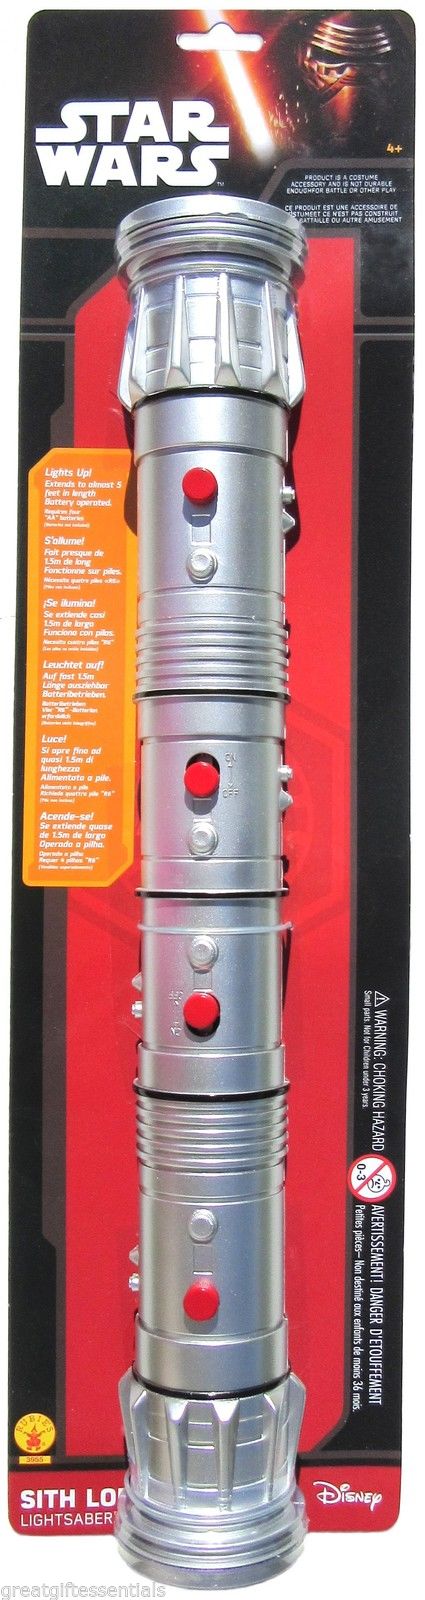 STAR WARS Light Saber DOUBLE RED DARTH MAUL SITH LORD Lightsaber LICENSED NEW